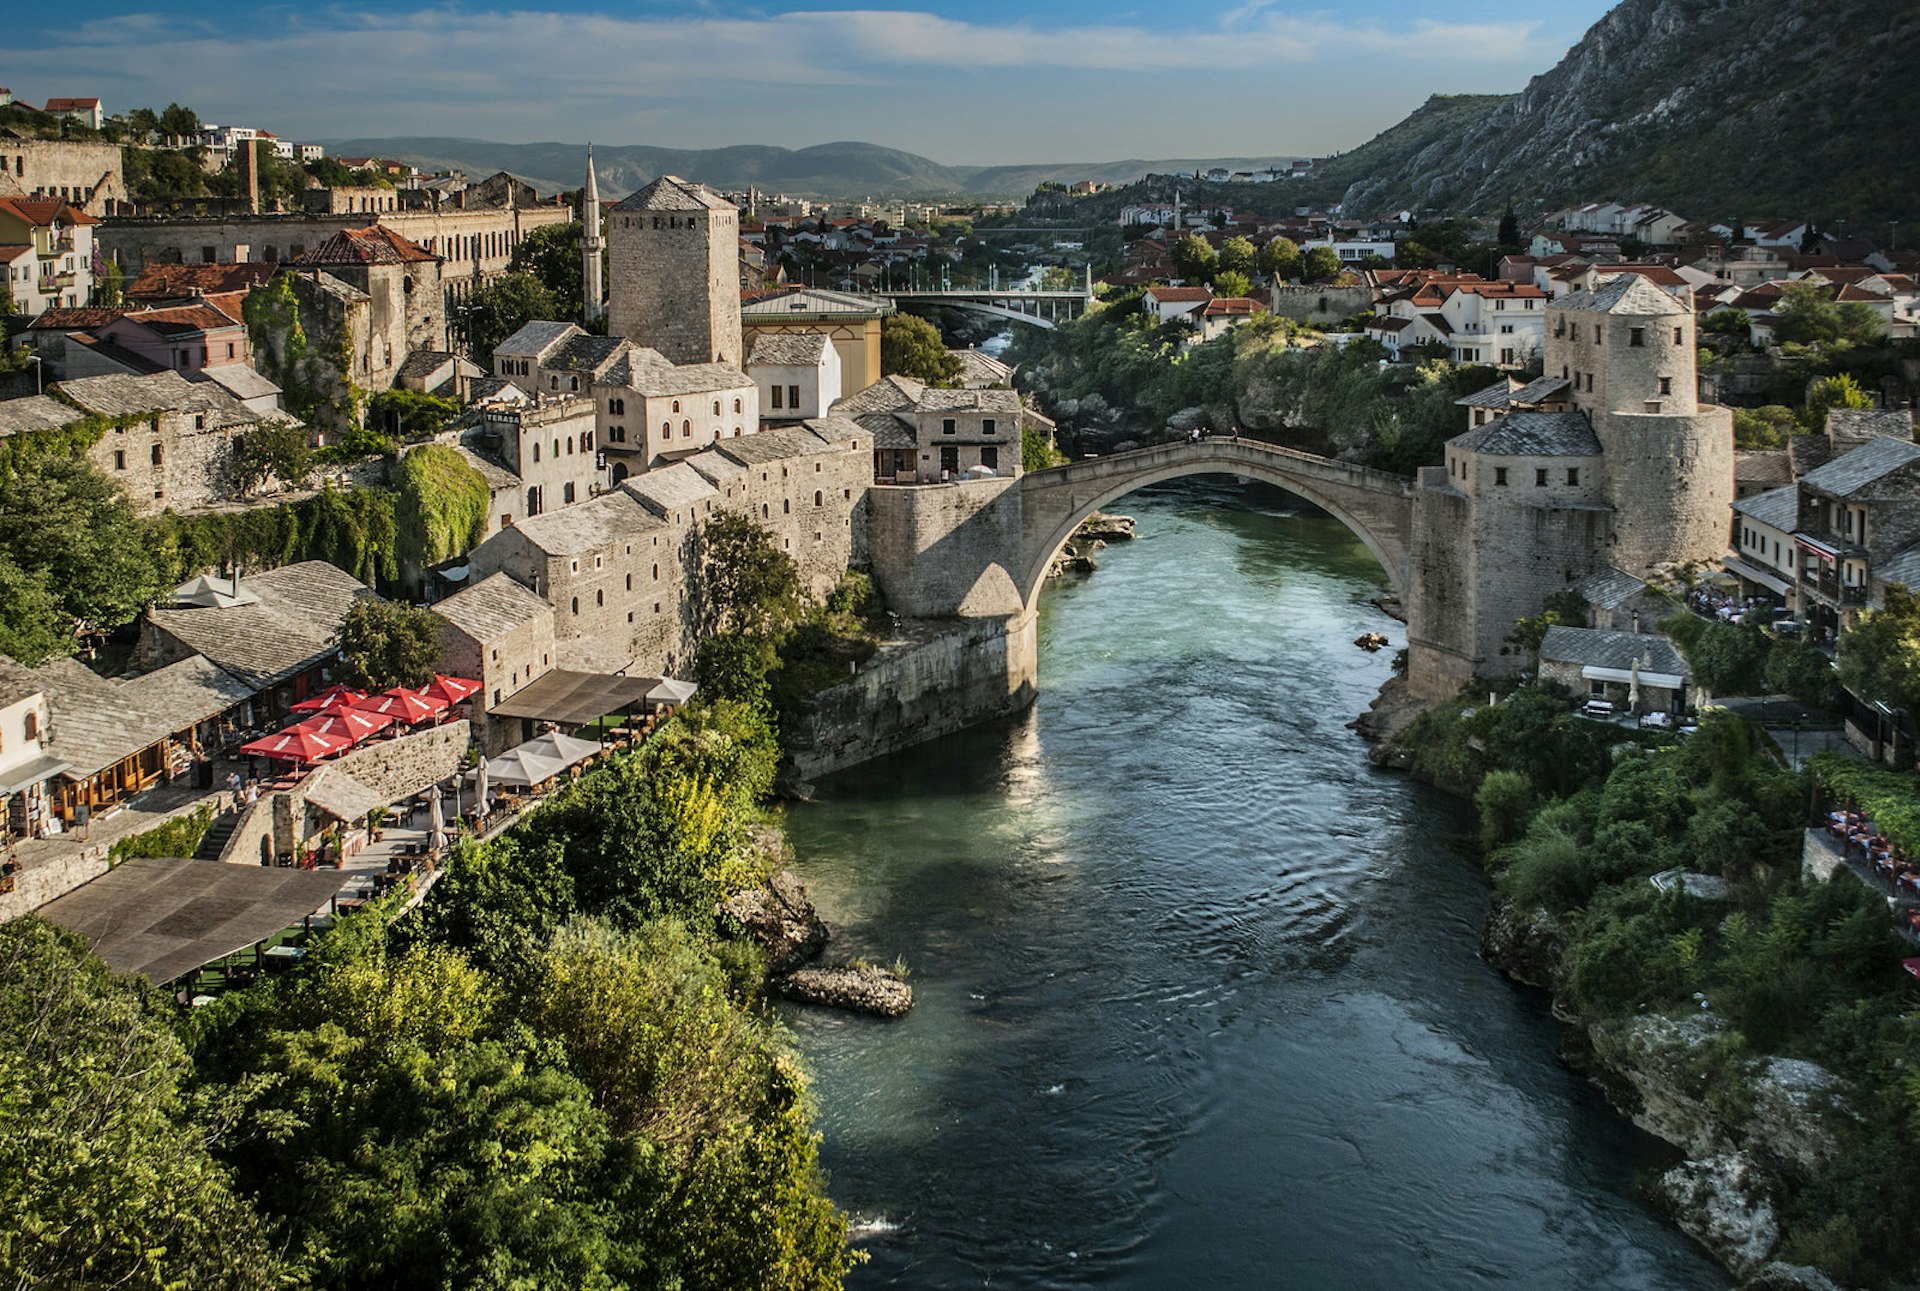 The city of Mostar, with stone buildings lining the river and its very high, arched stone bridge in the centre